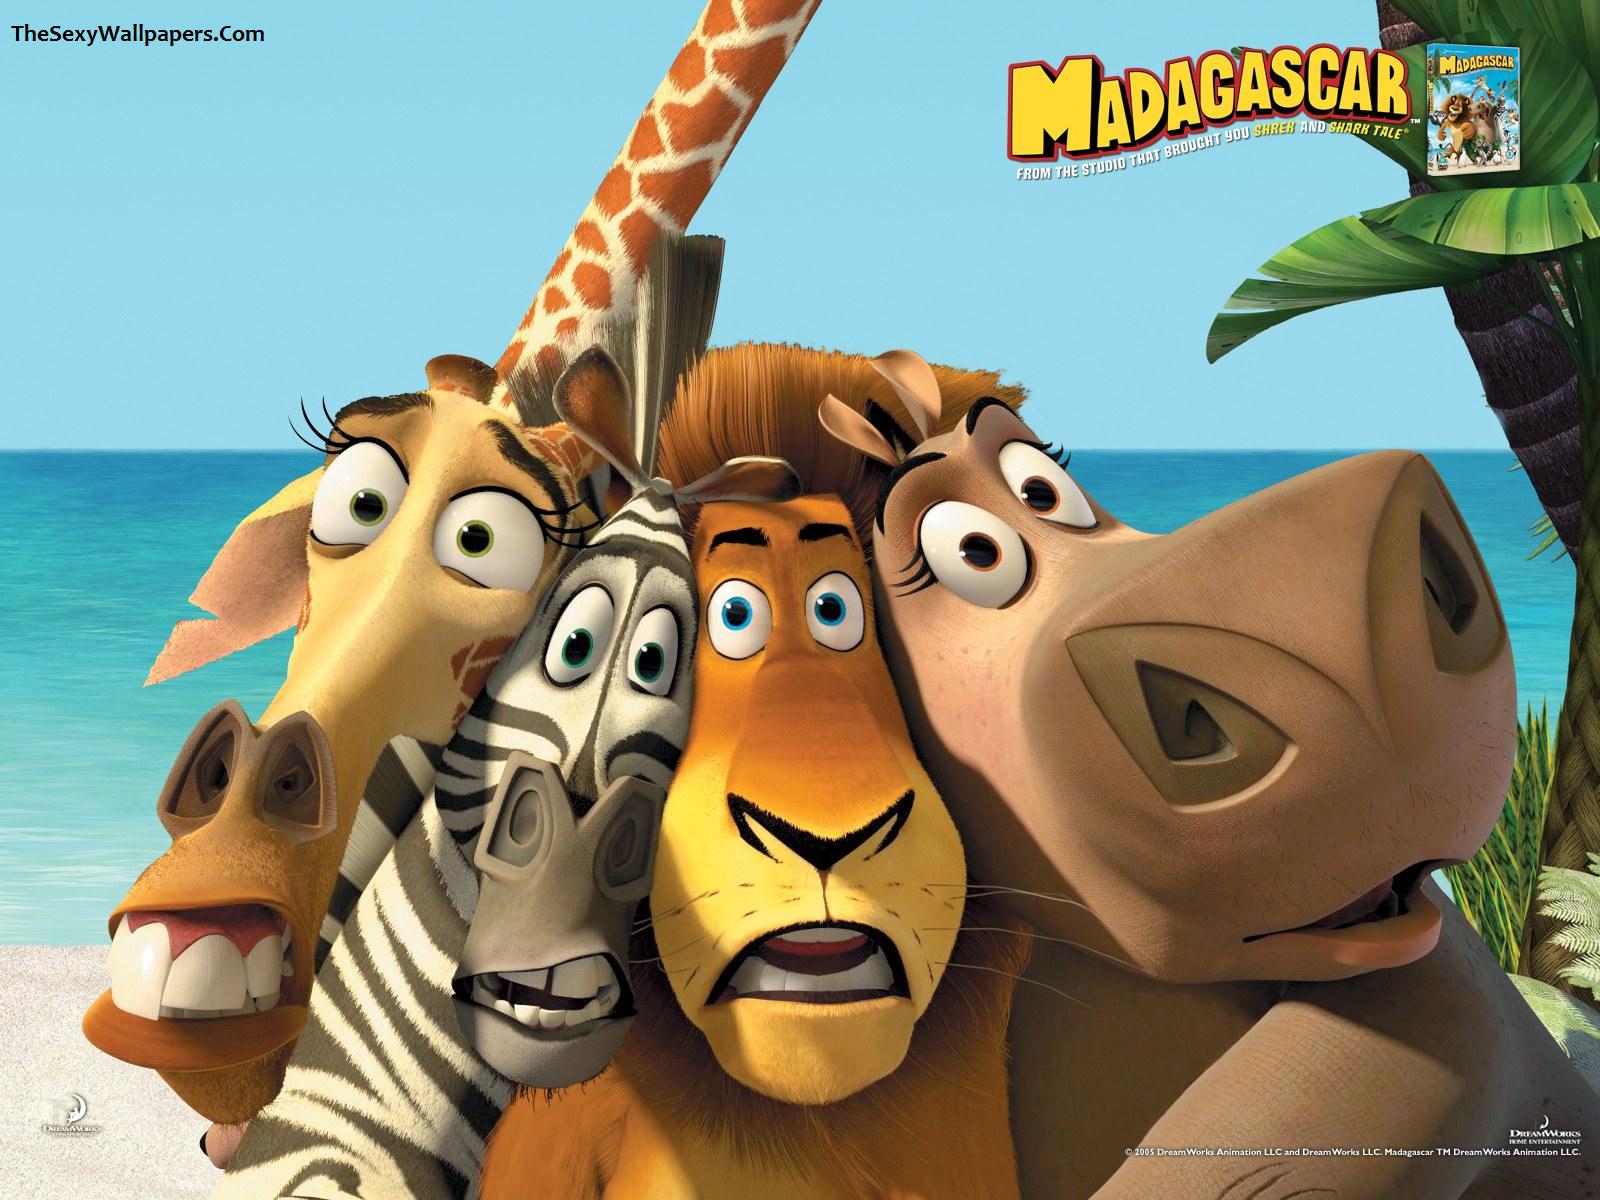 Madagascar Wallpaper - The Sexy Wallpapers